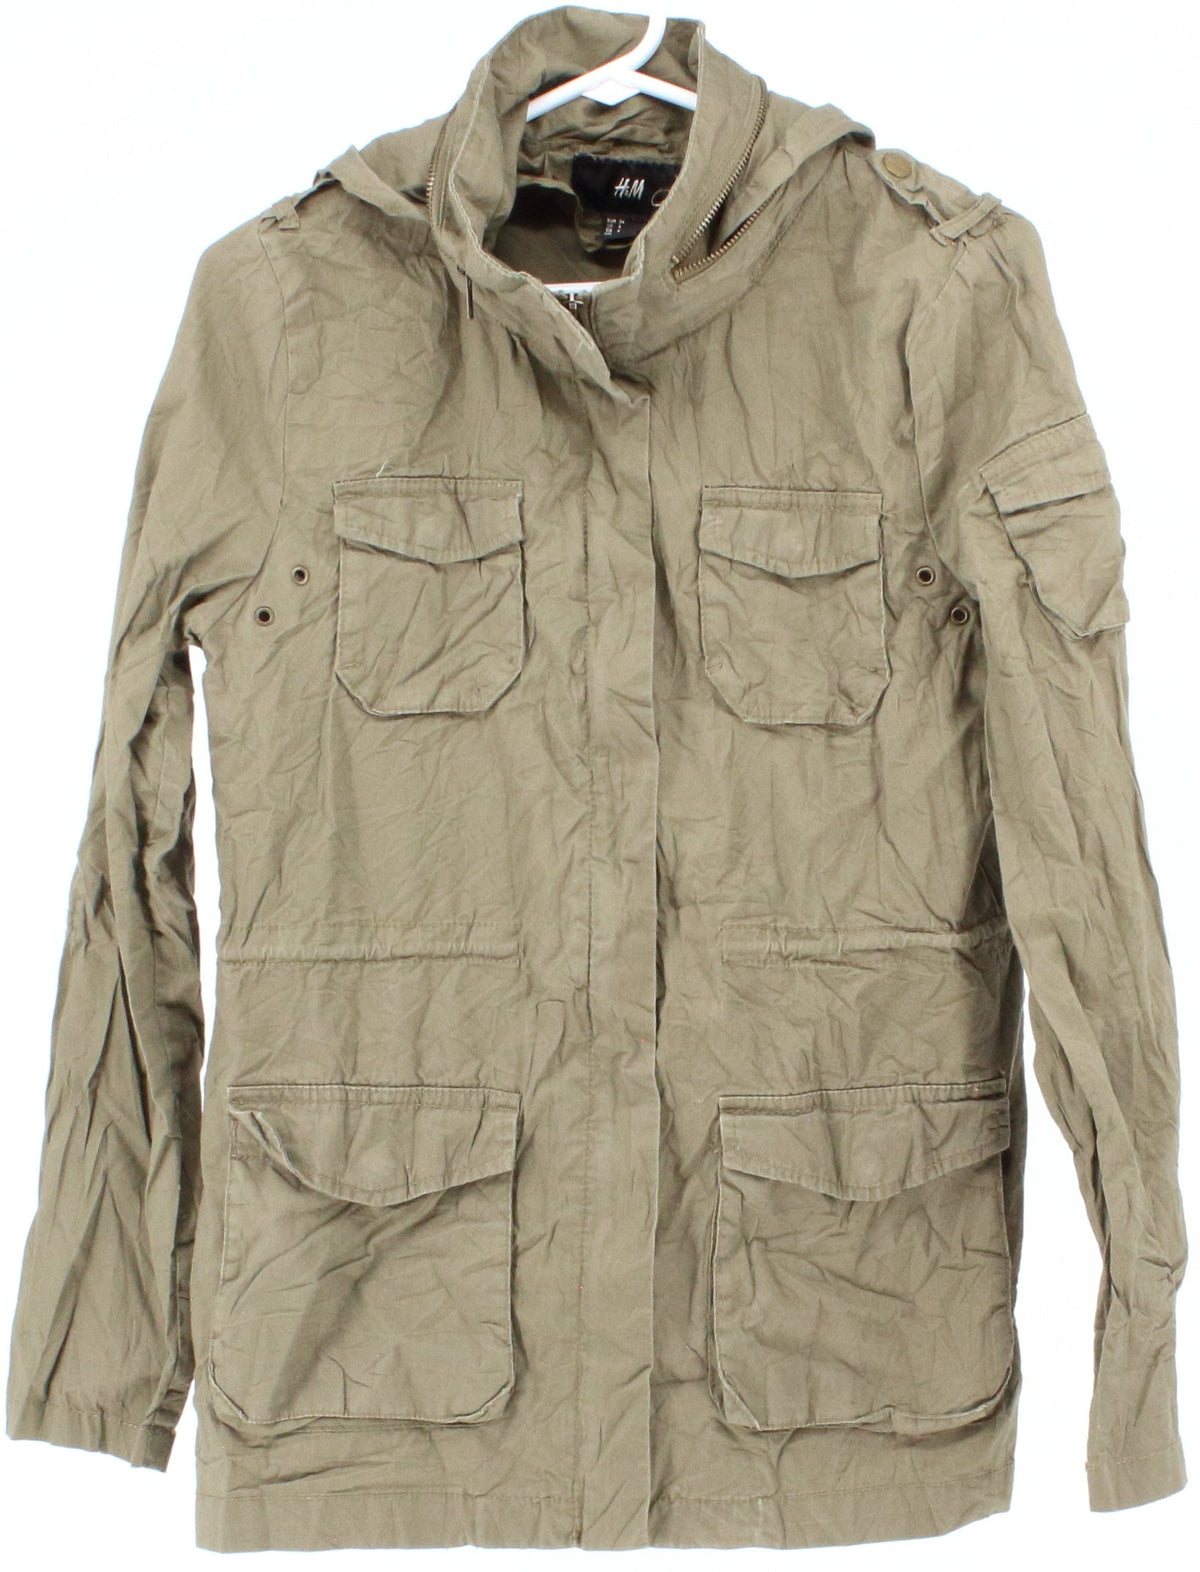 H&M Army Green Hooded Women's Jacket